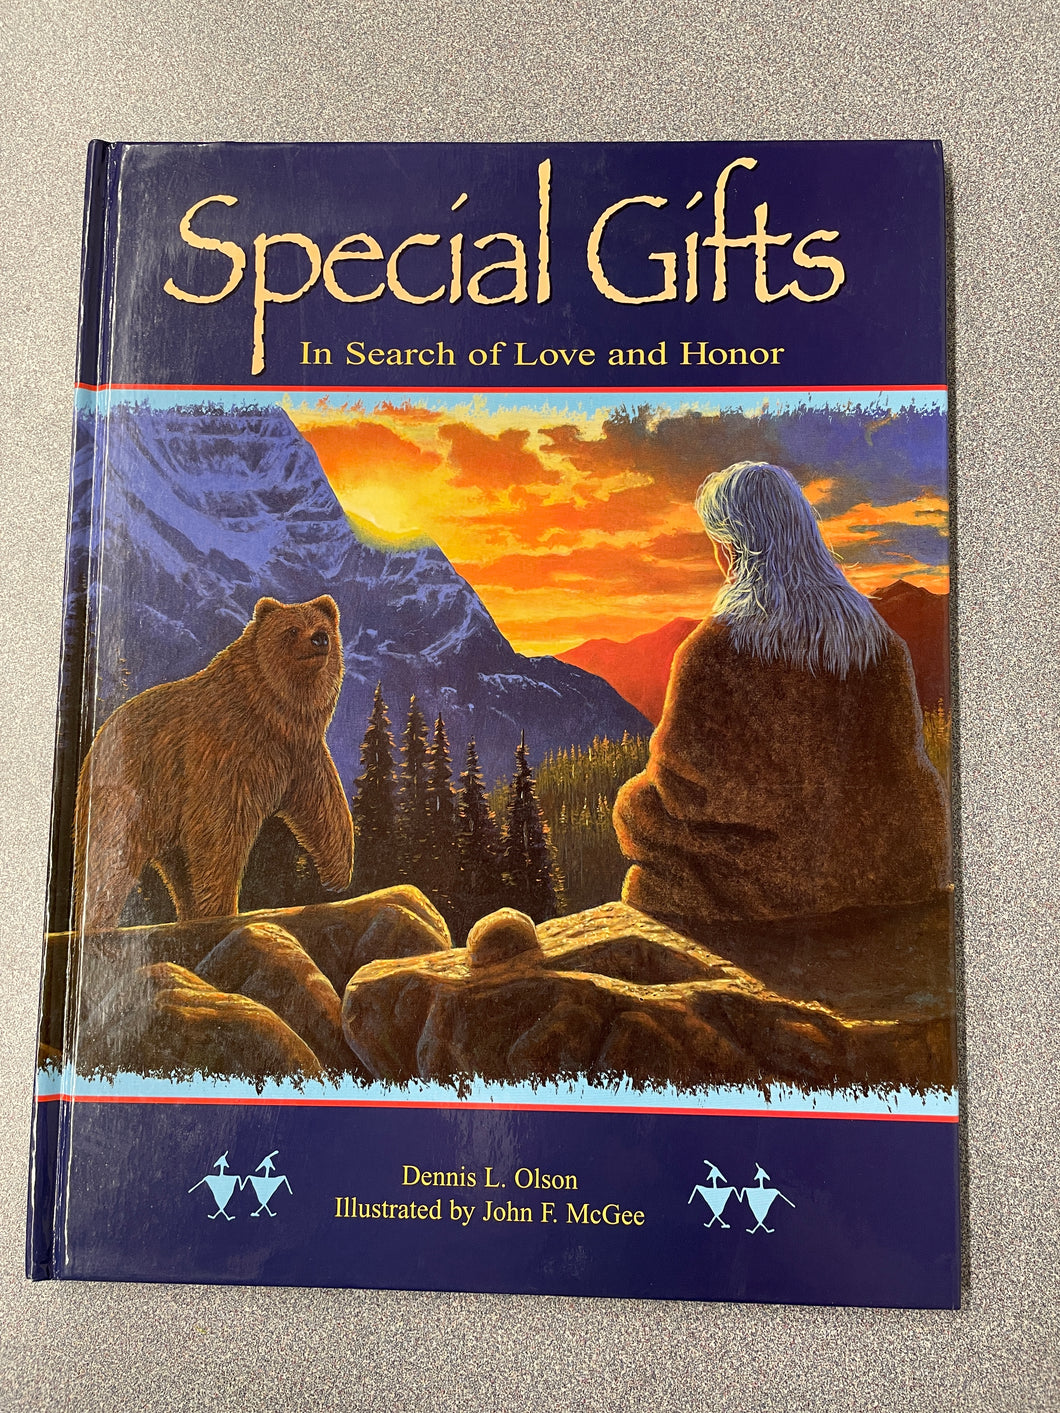 Olson, Dennis L., Special Gifts: In Search of Love and Honor [1999] CP 2/24